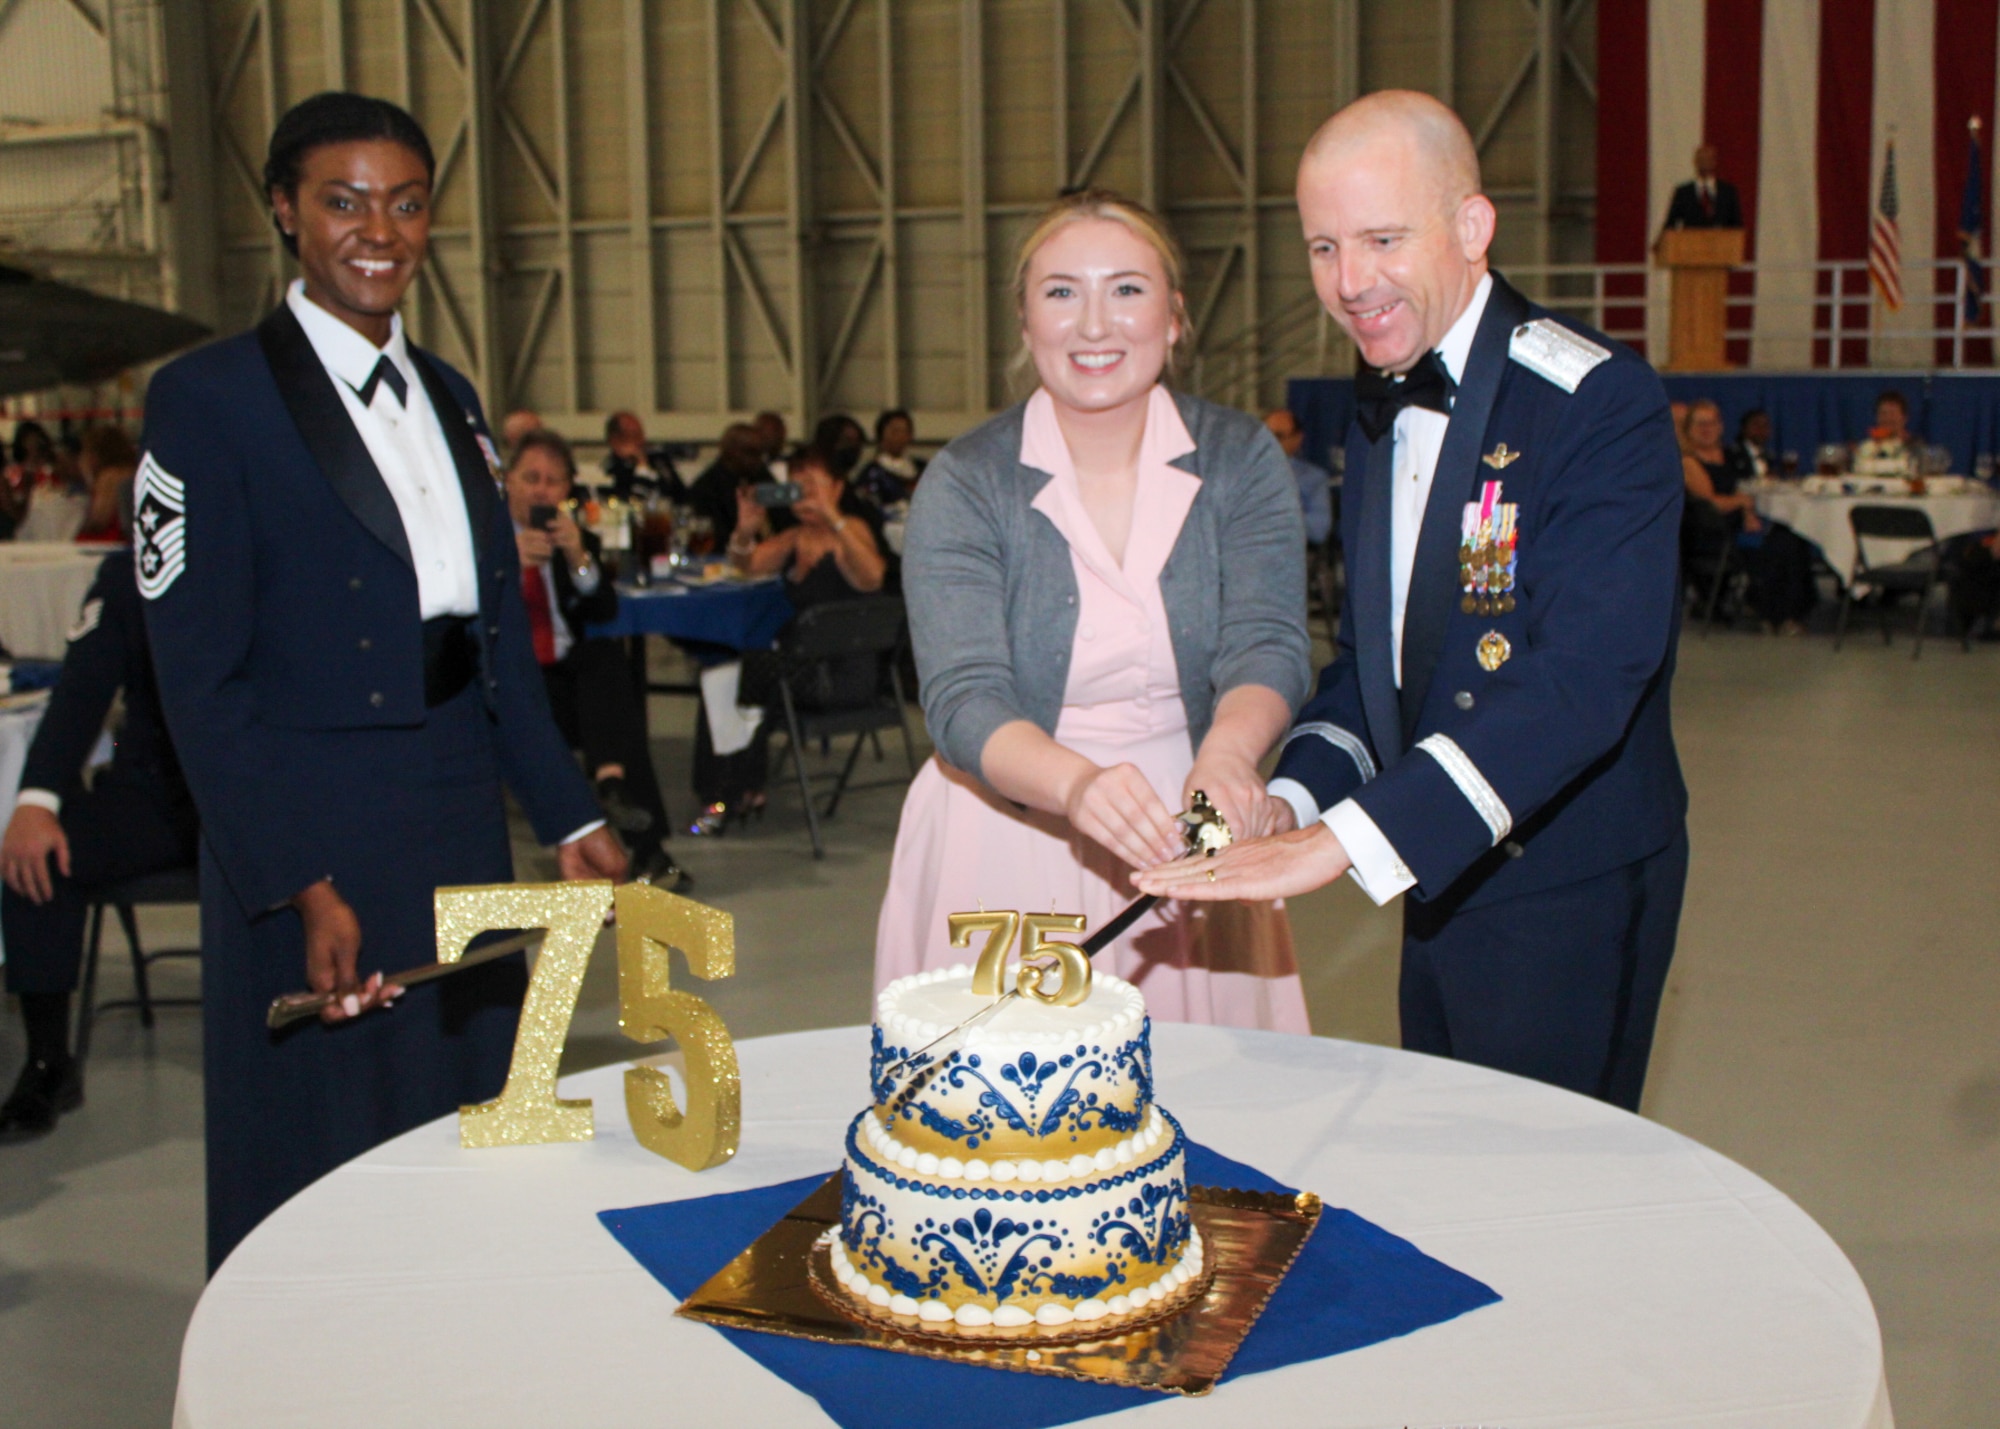 Brig. Gen. Matthew Higer, 412th Test Wing Commander, and Senior Airman Allyson Biamonte, 412th Comptroller Squadron, and youngest Airman in attendance, cuts the cake during the 2022 Department of the Air Force Ball at Edwards Air Force Base, California, Sept. 16. (Air Force photo by Laura Maples)